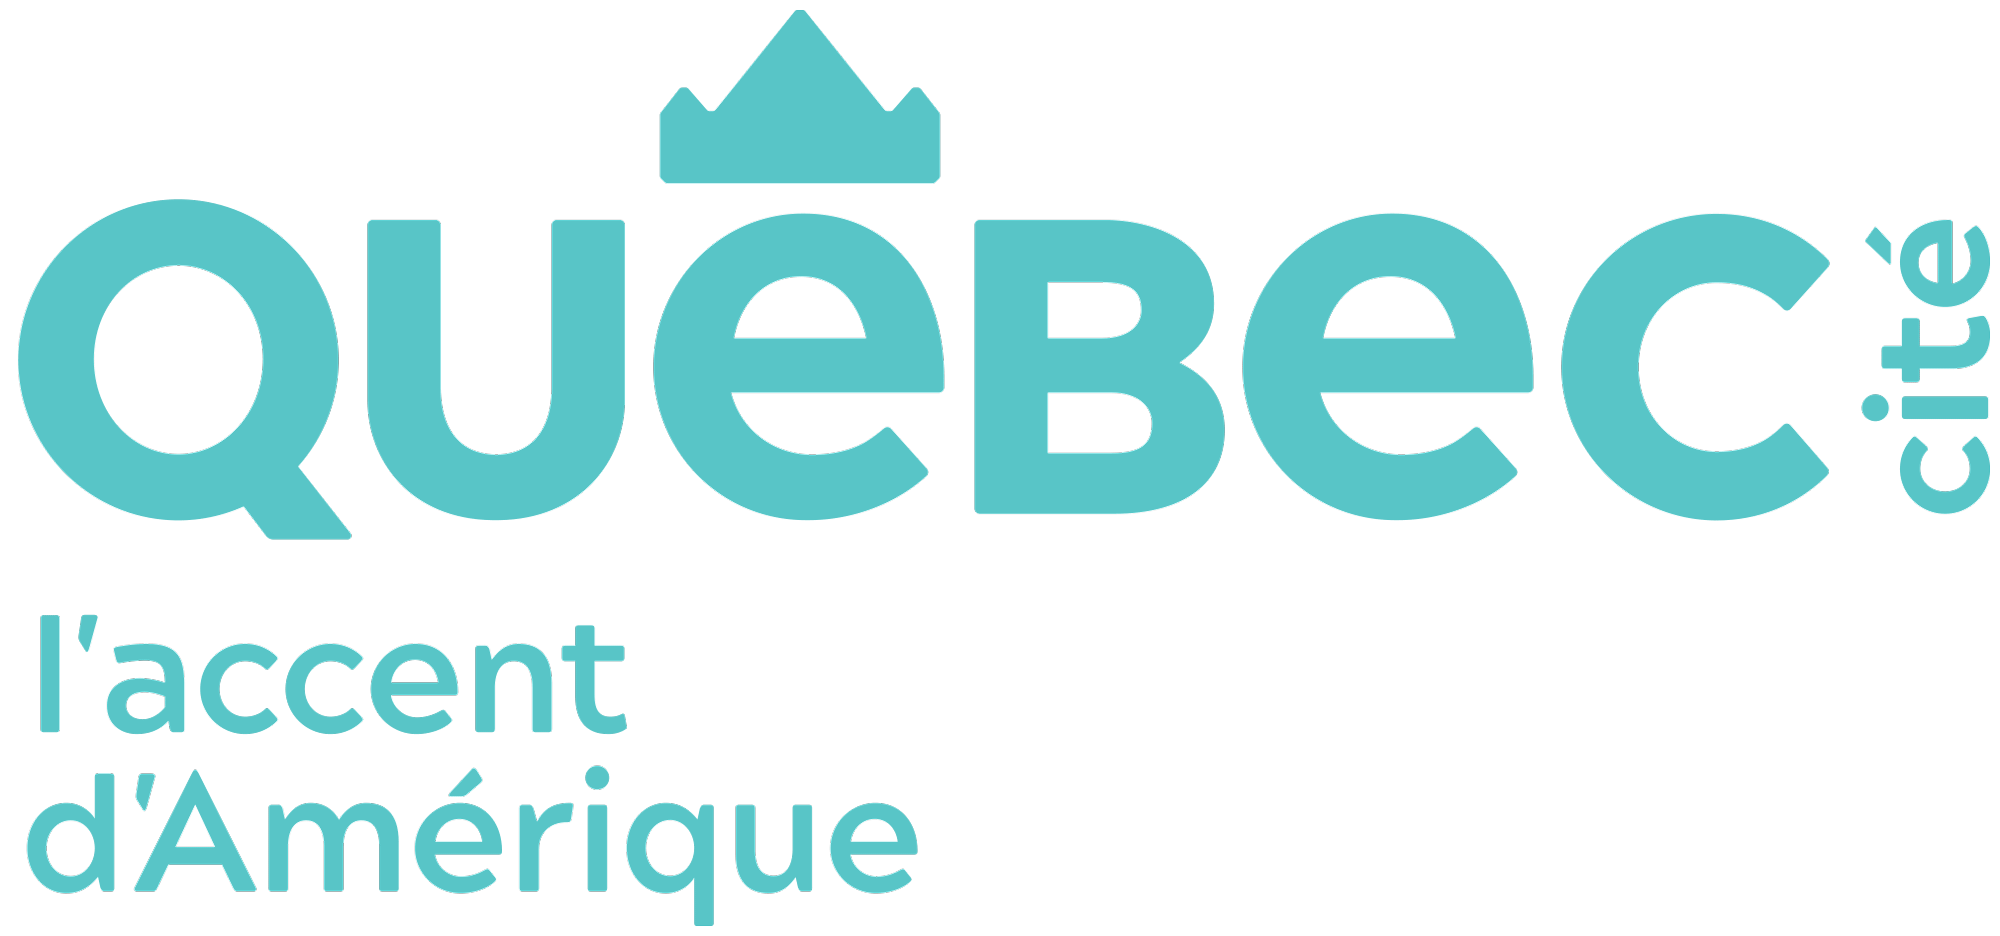 Quebec Logo - Brand New: New Logo and Identity for Québec City Tourism by Cossette